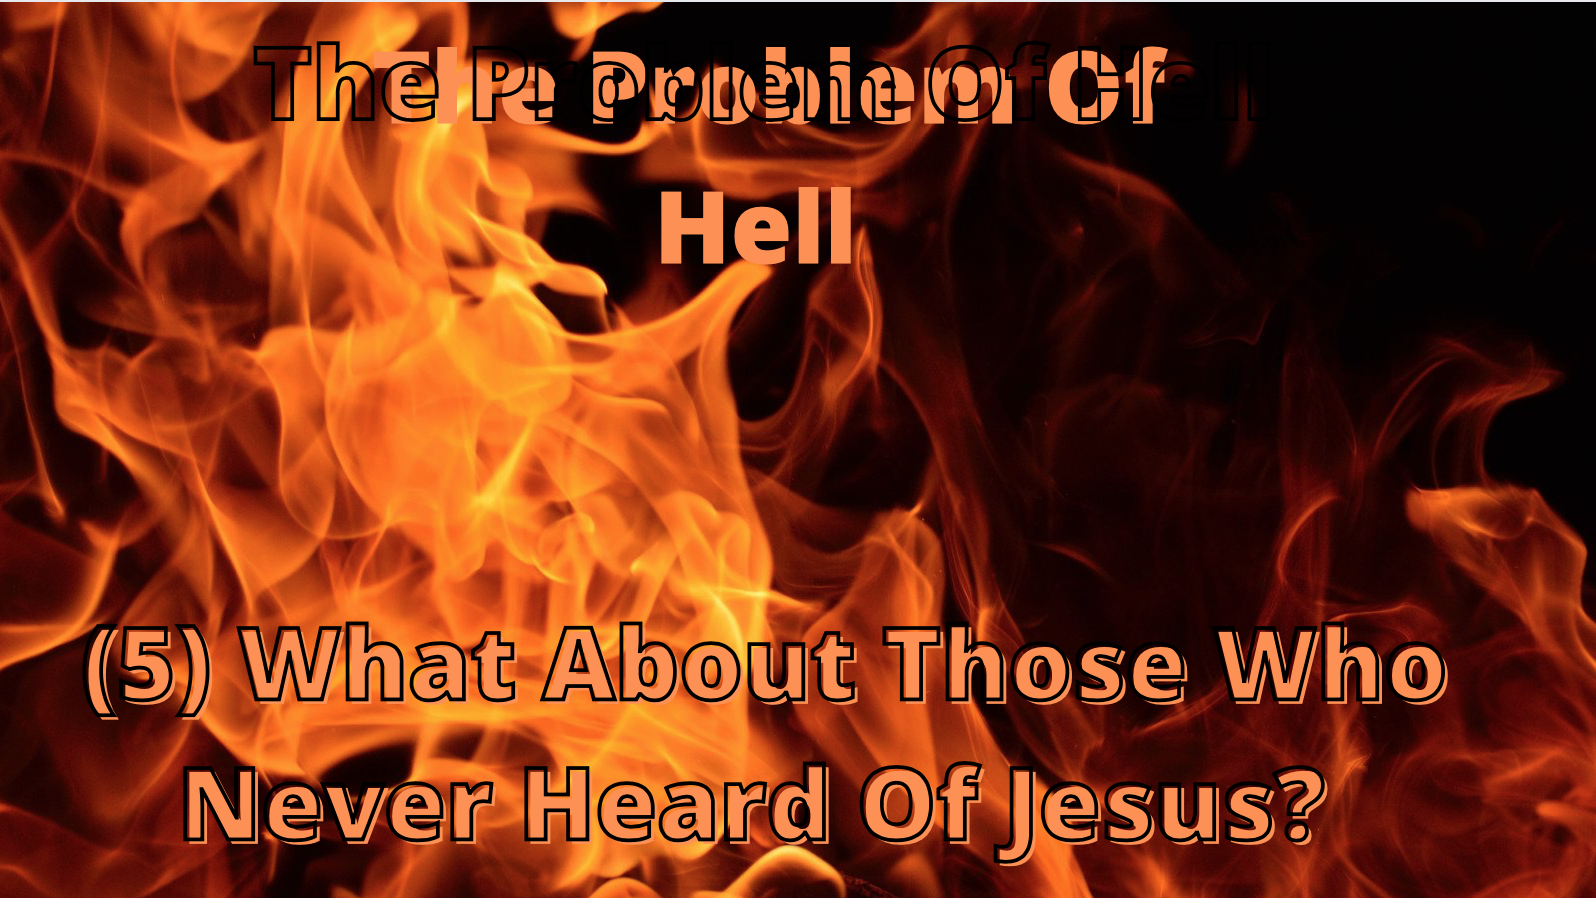 The Problem Of Hell (5) - What About Those Who Never Heard Of Jesus?